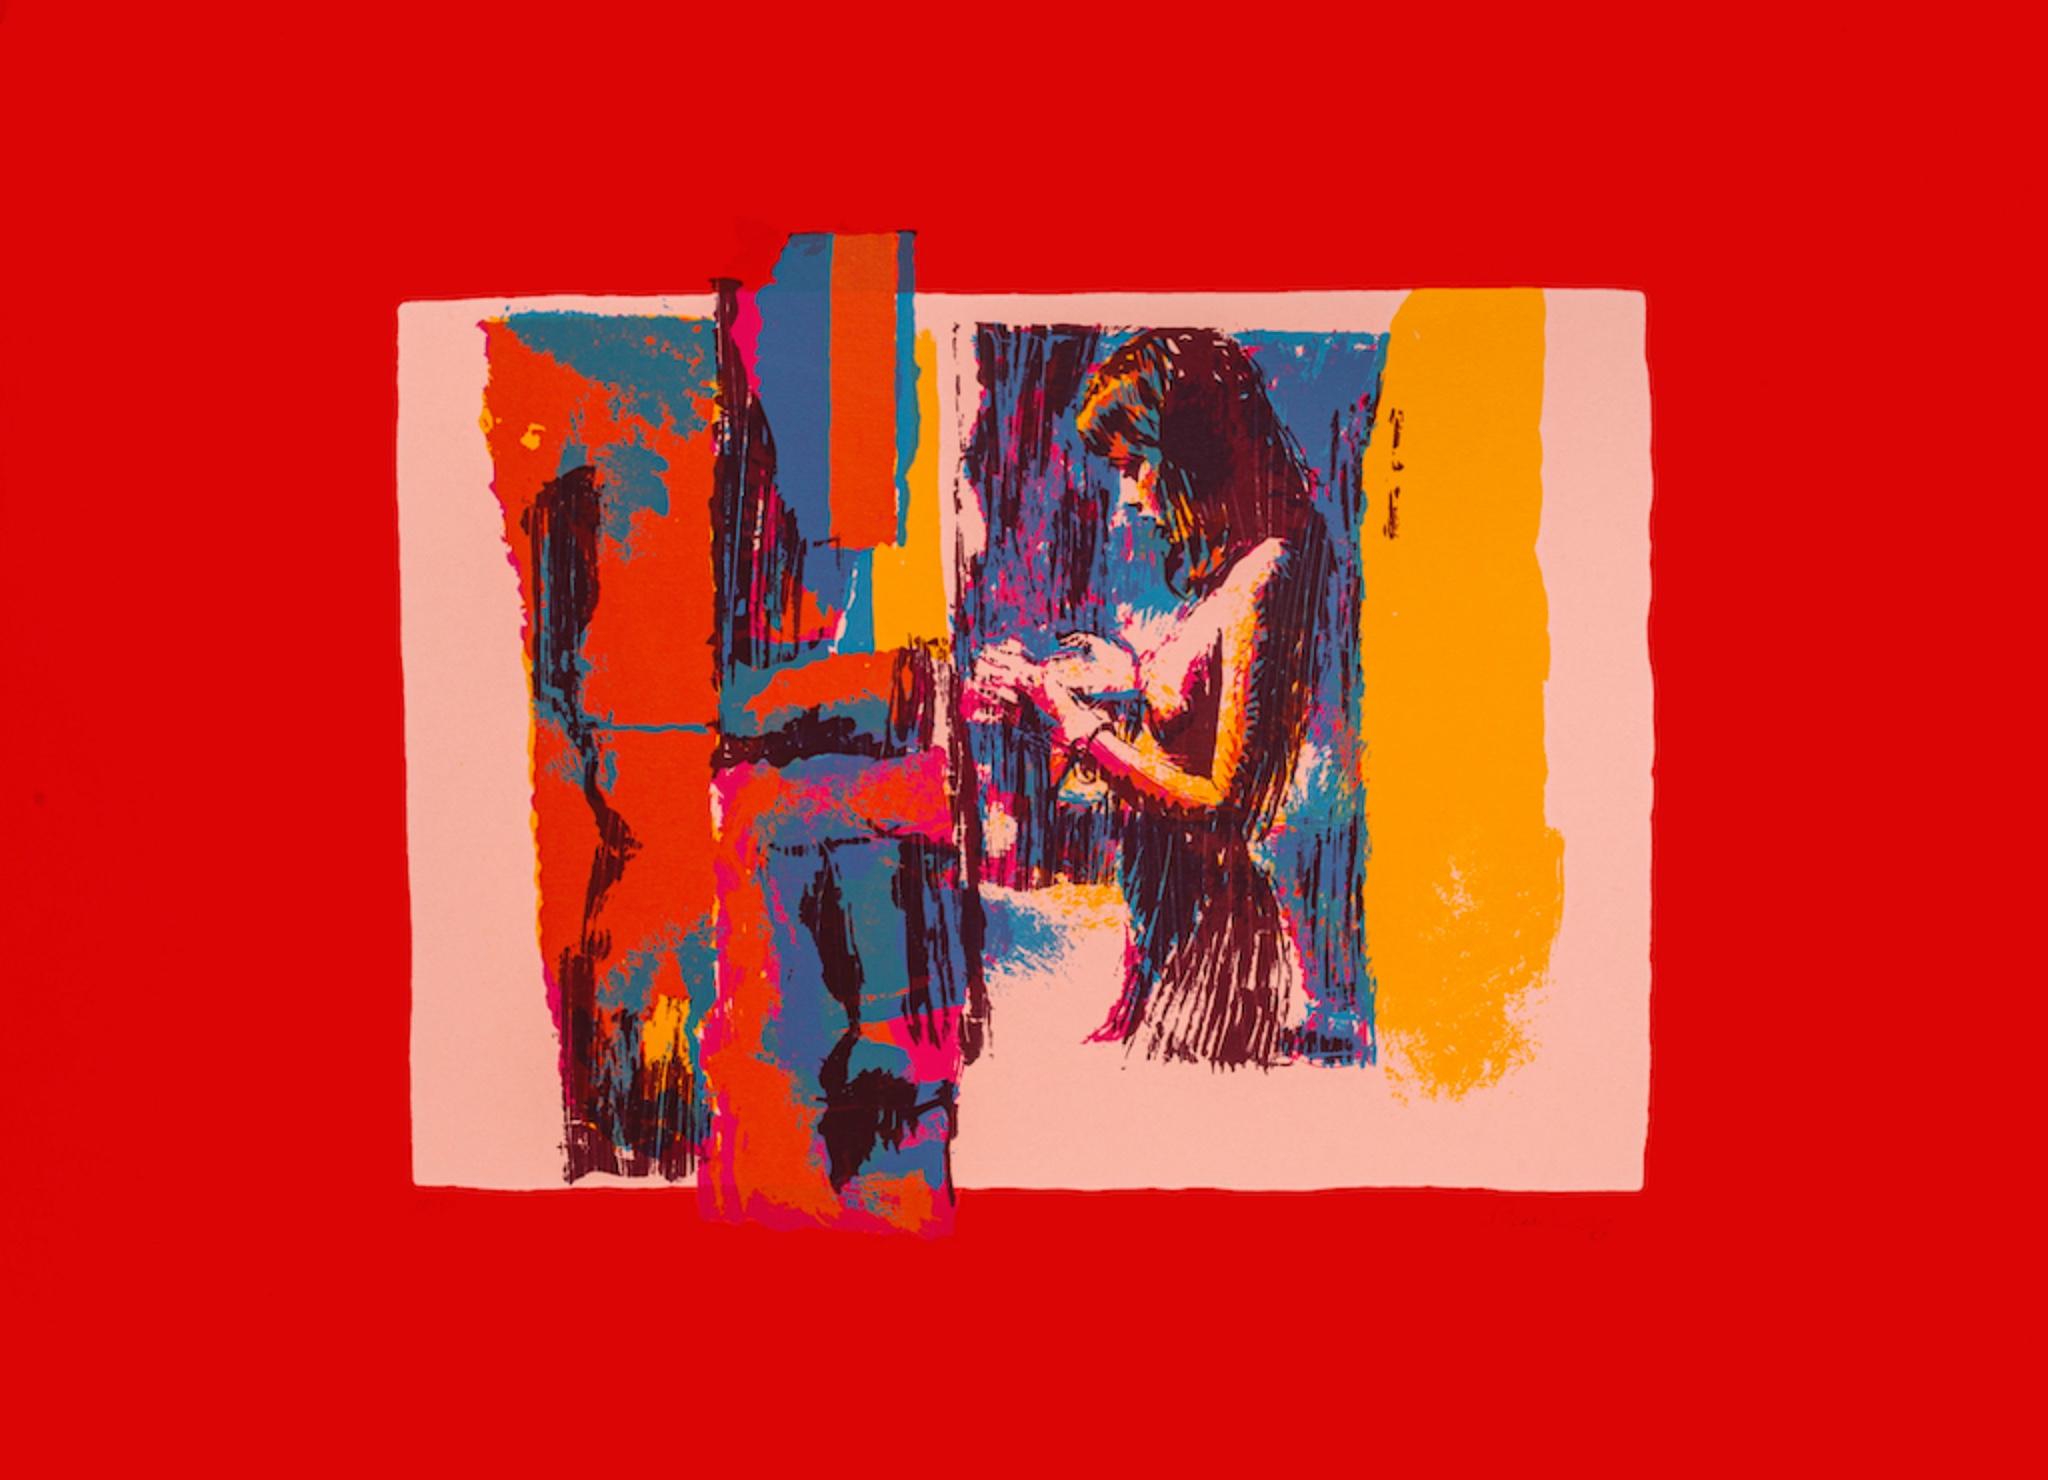 Woman i is an original screen print realized by Nicola Simbari in 1976.

Hand-signed on the lower right.

Numbered .Edition 11/90.

The artwork represents a female nude in profile with an abstract multicolour composition. There are colored boxes